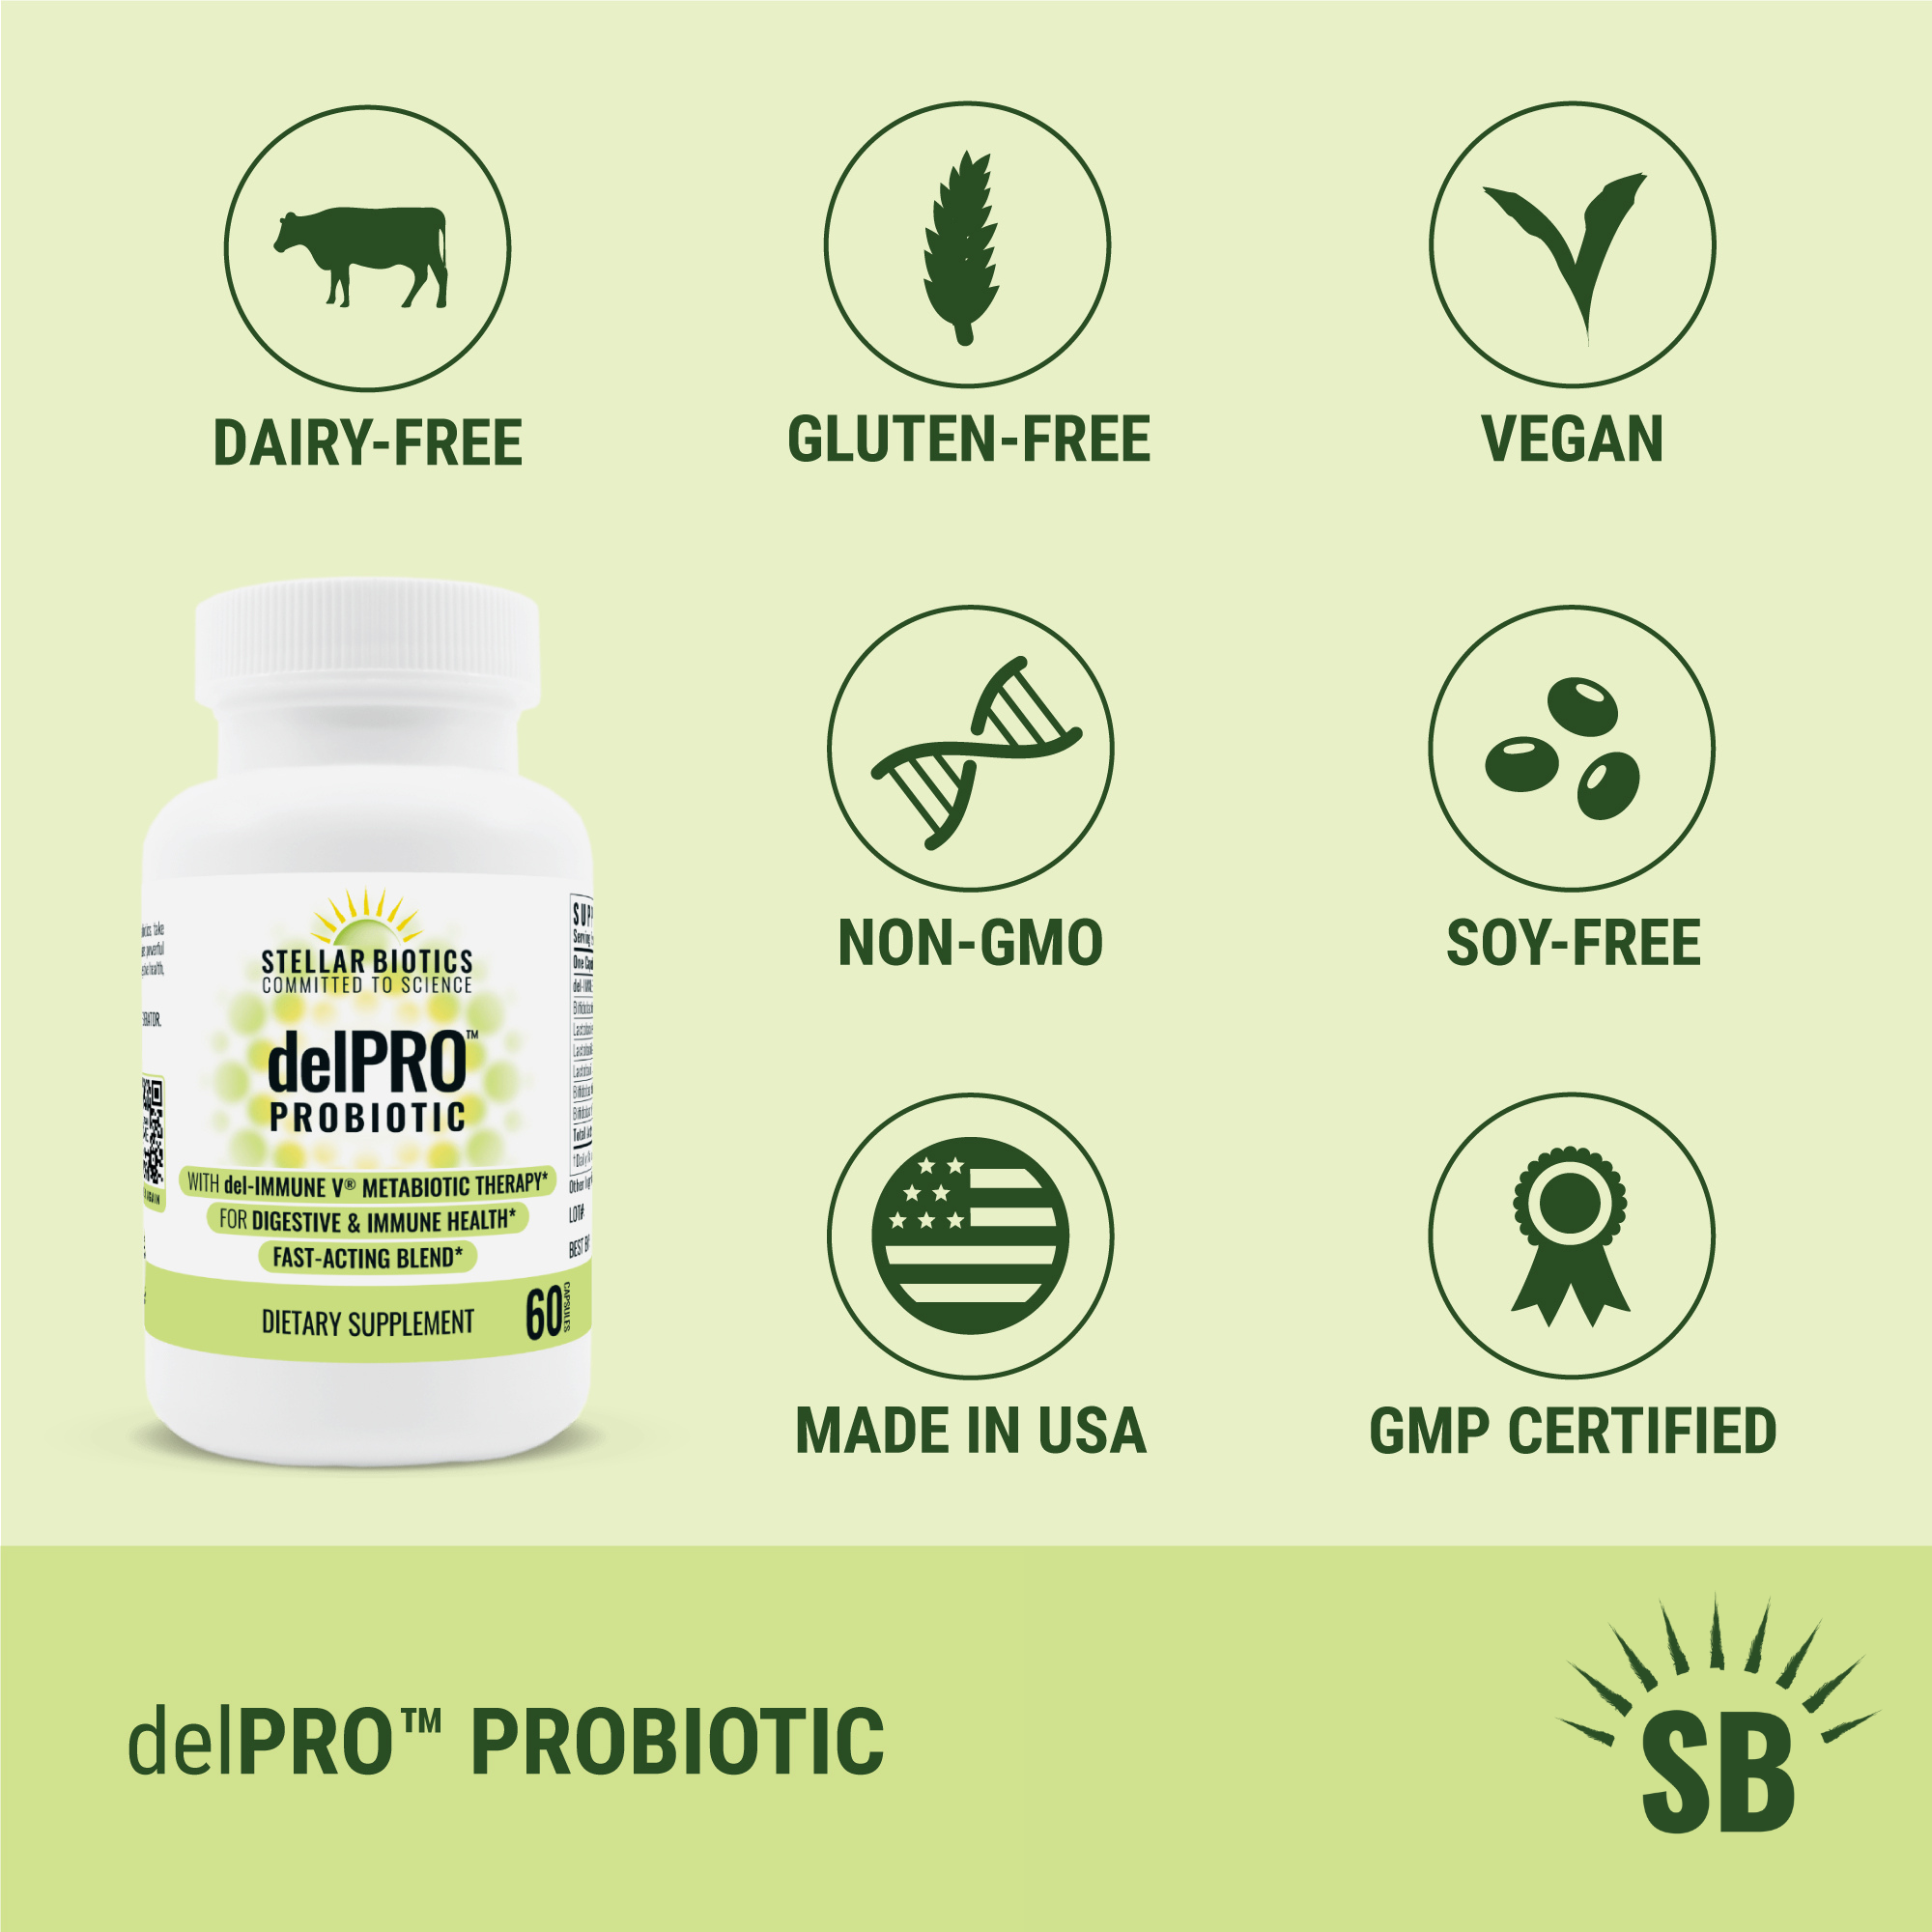 delpro probiotic is vegan, Non-GMO, Dairy-Free, Gluten-Free, Soy-Free, GMP Certified, Made in USA (edited) 